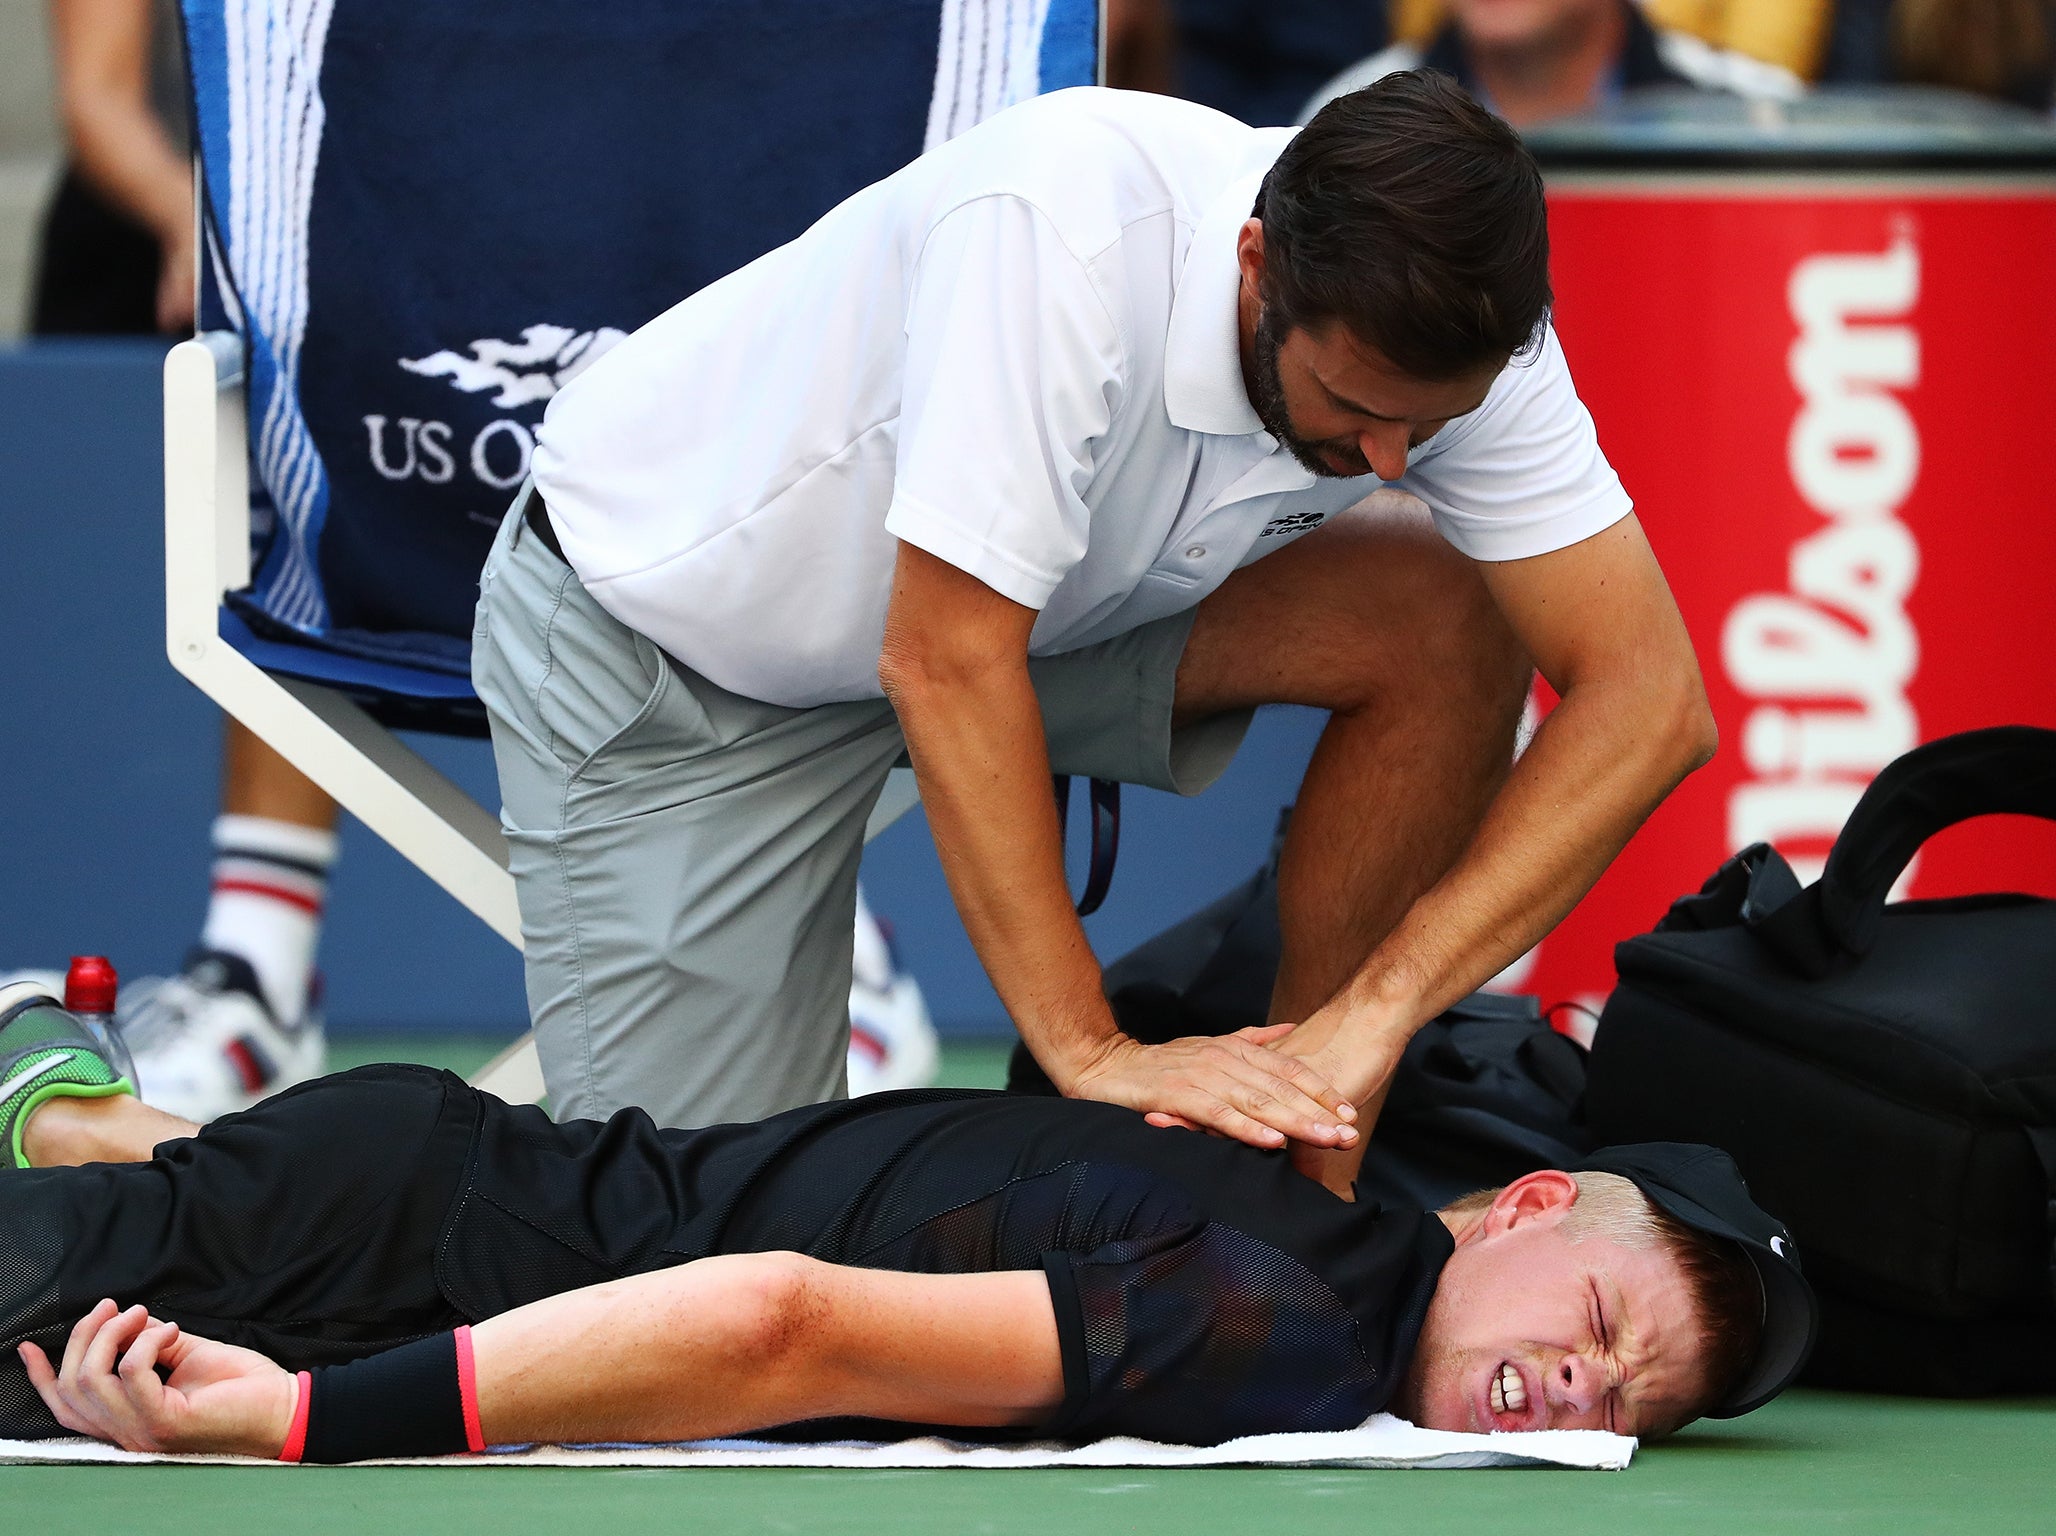 Edmund failed to recover from a back injury